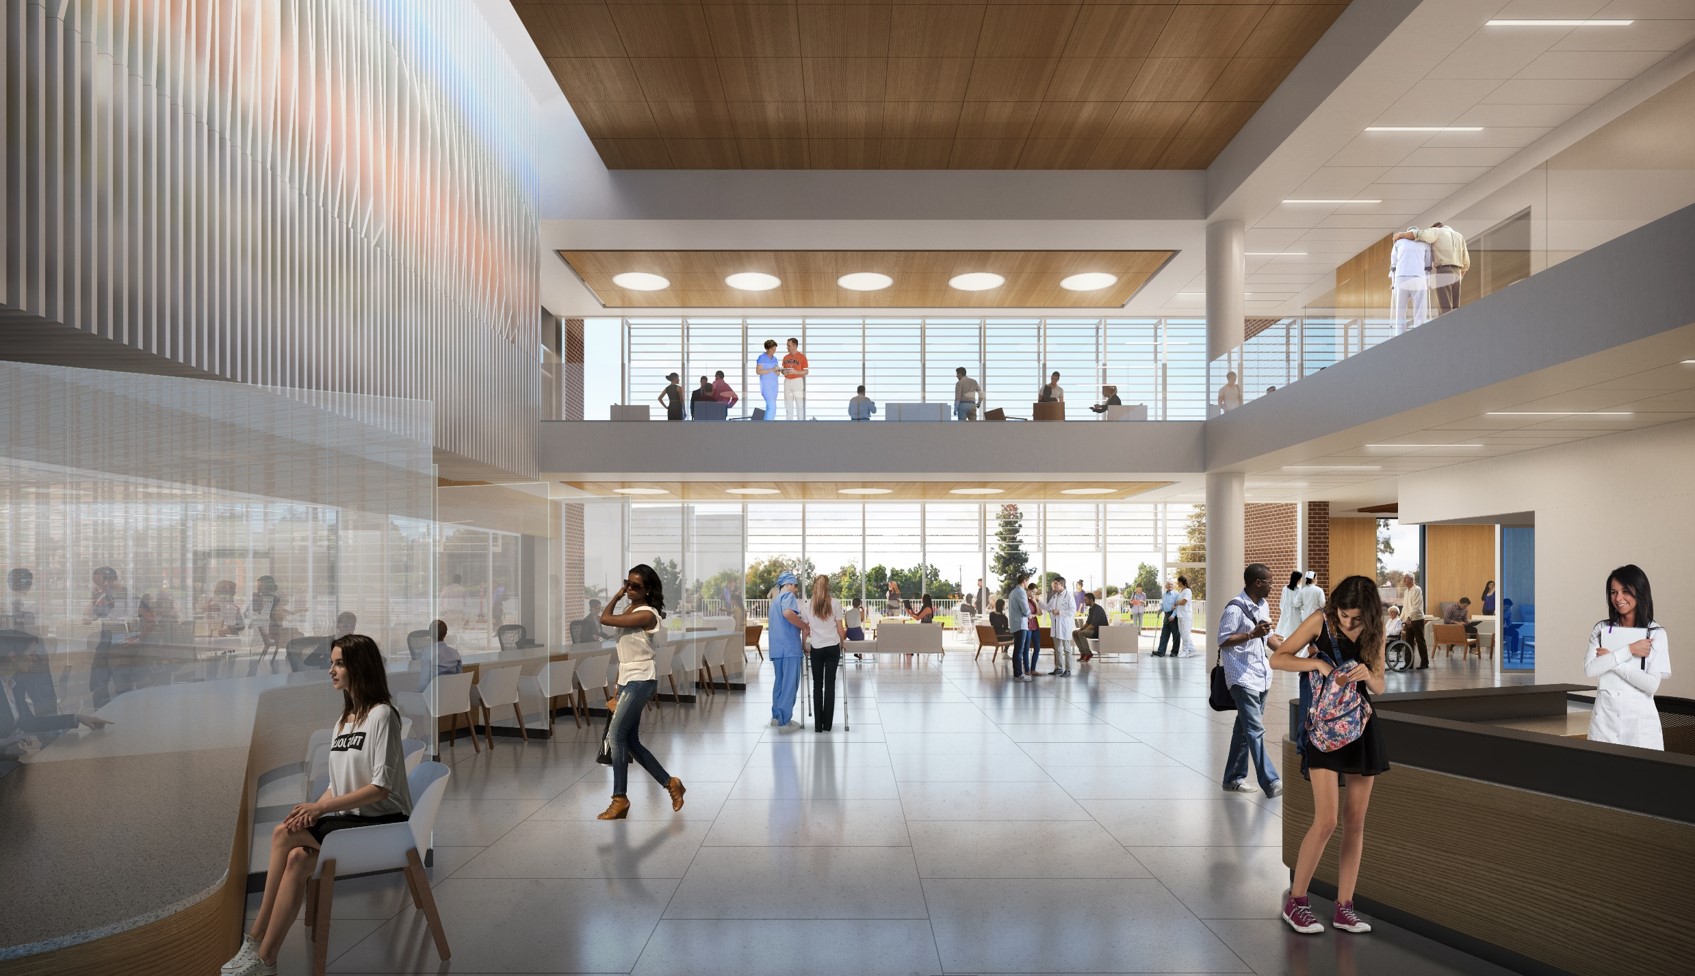 A rendering of the lobby of the orthopedic outpatient care facility.